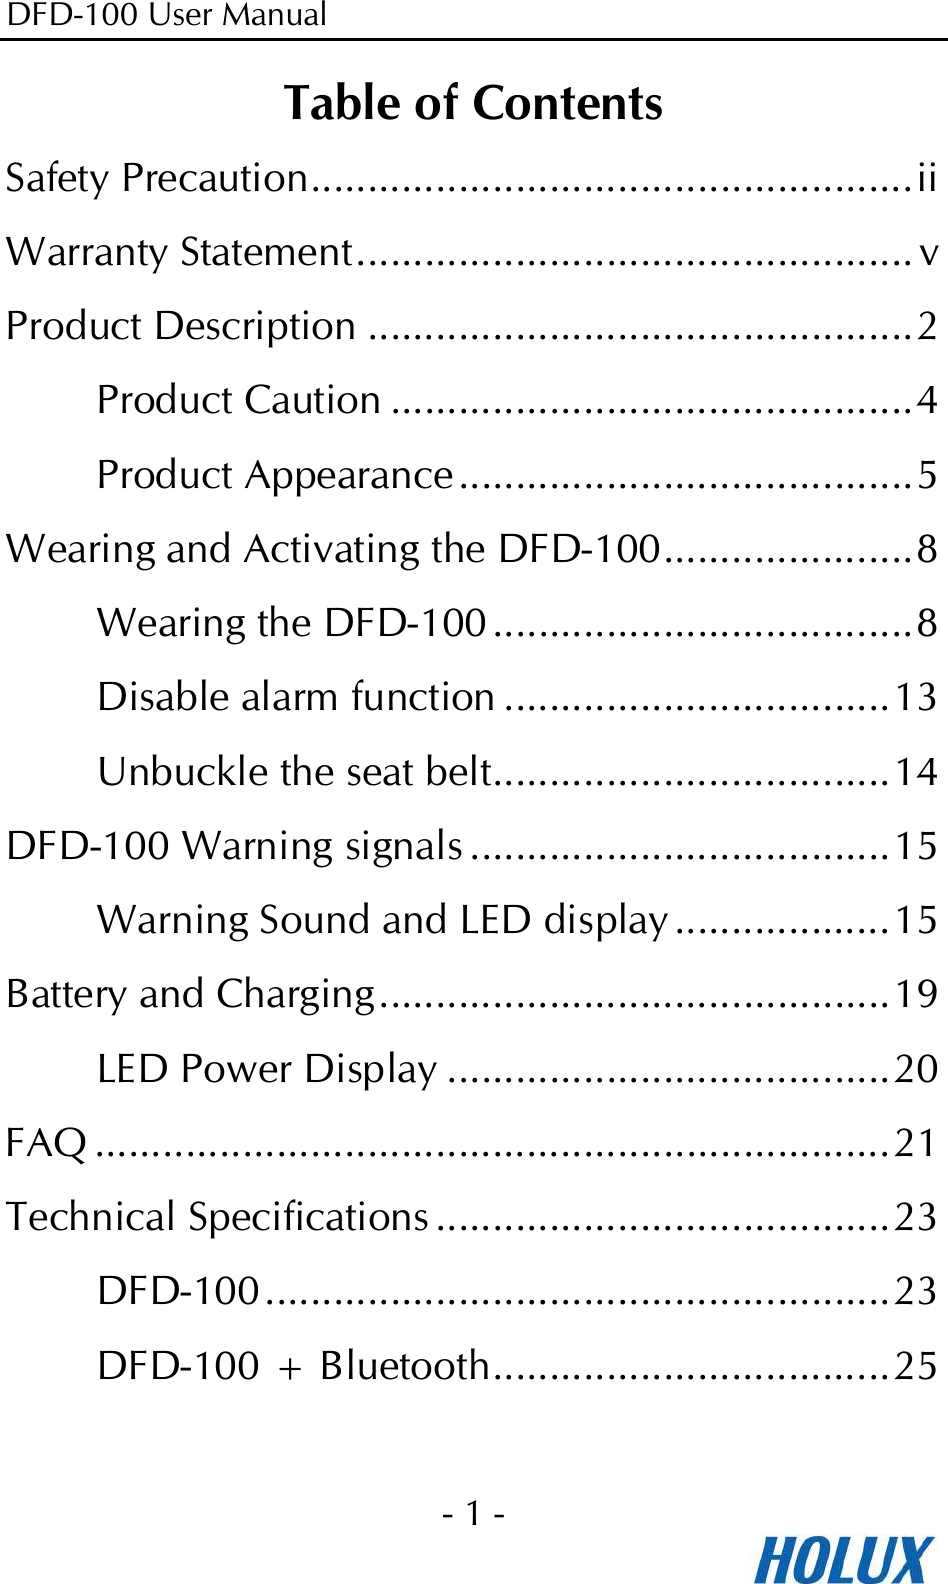 DFD-100 User Manual - 1 -  Table of Contents Safety Precaution.....................................................ii Warranty Statement................................................. v Product Description ................................................2 Product Caution ..............................................4 Product Appearance ........................................5 Wearing and Activating the DFD-100......................8 Wearing the DFD-100 .....................................8 Disable alarm function ..................................13 Unbuckle the seat belt...................................14 DFD-100 Warning signals .....................................15 Warning Sound and LED display ...................15 Battery and Charging.............................................19 LED Power Display .......................................20 FAQ ......................................................................21 Technical Specifications ........................................23 DFD-100.......................................................23 DFD-100 + Bluetooth...................................25  